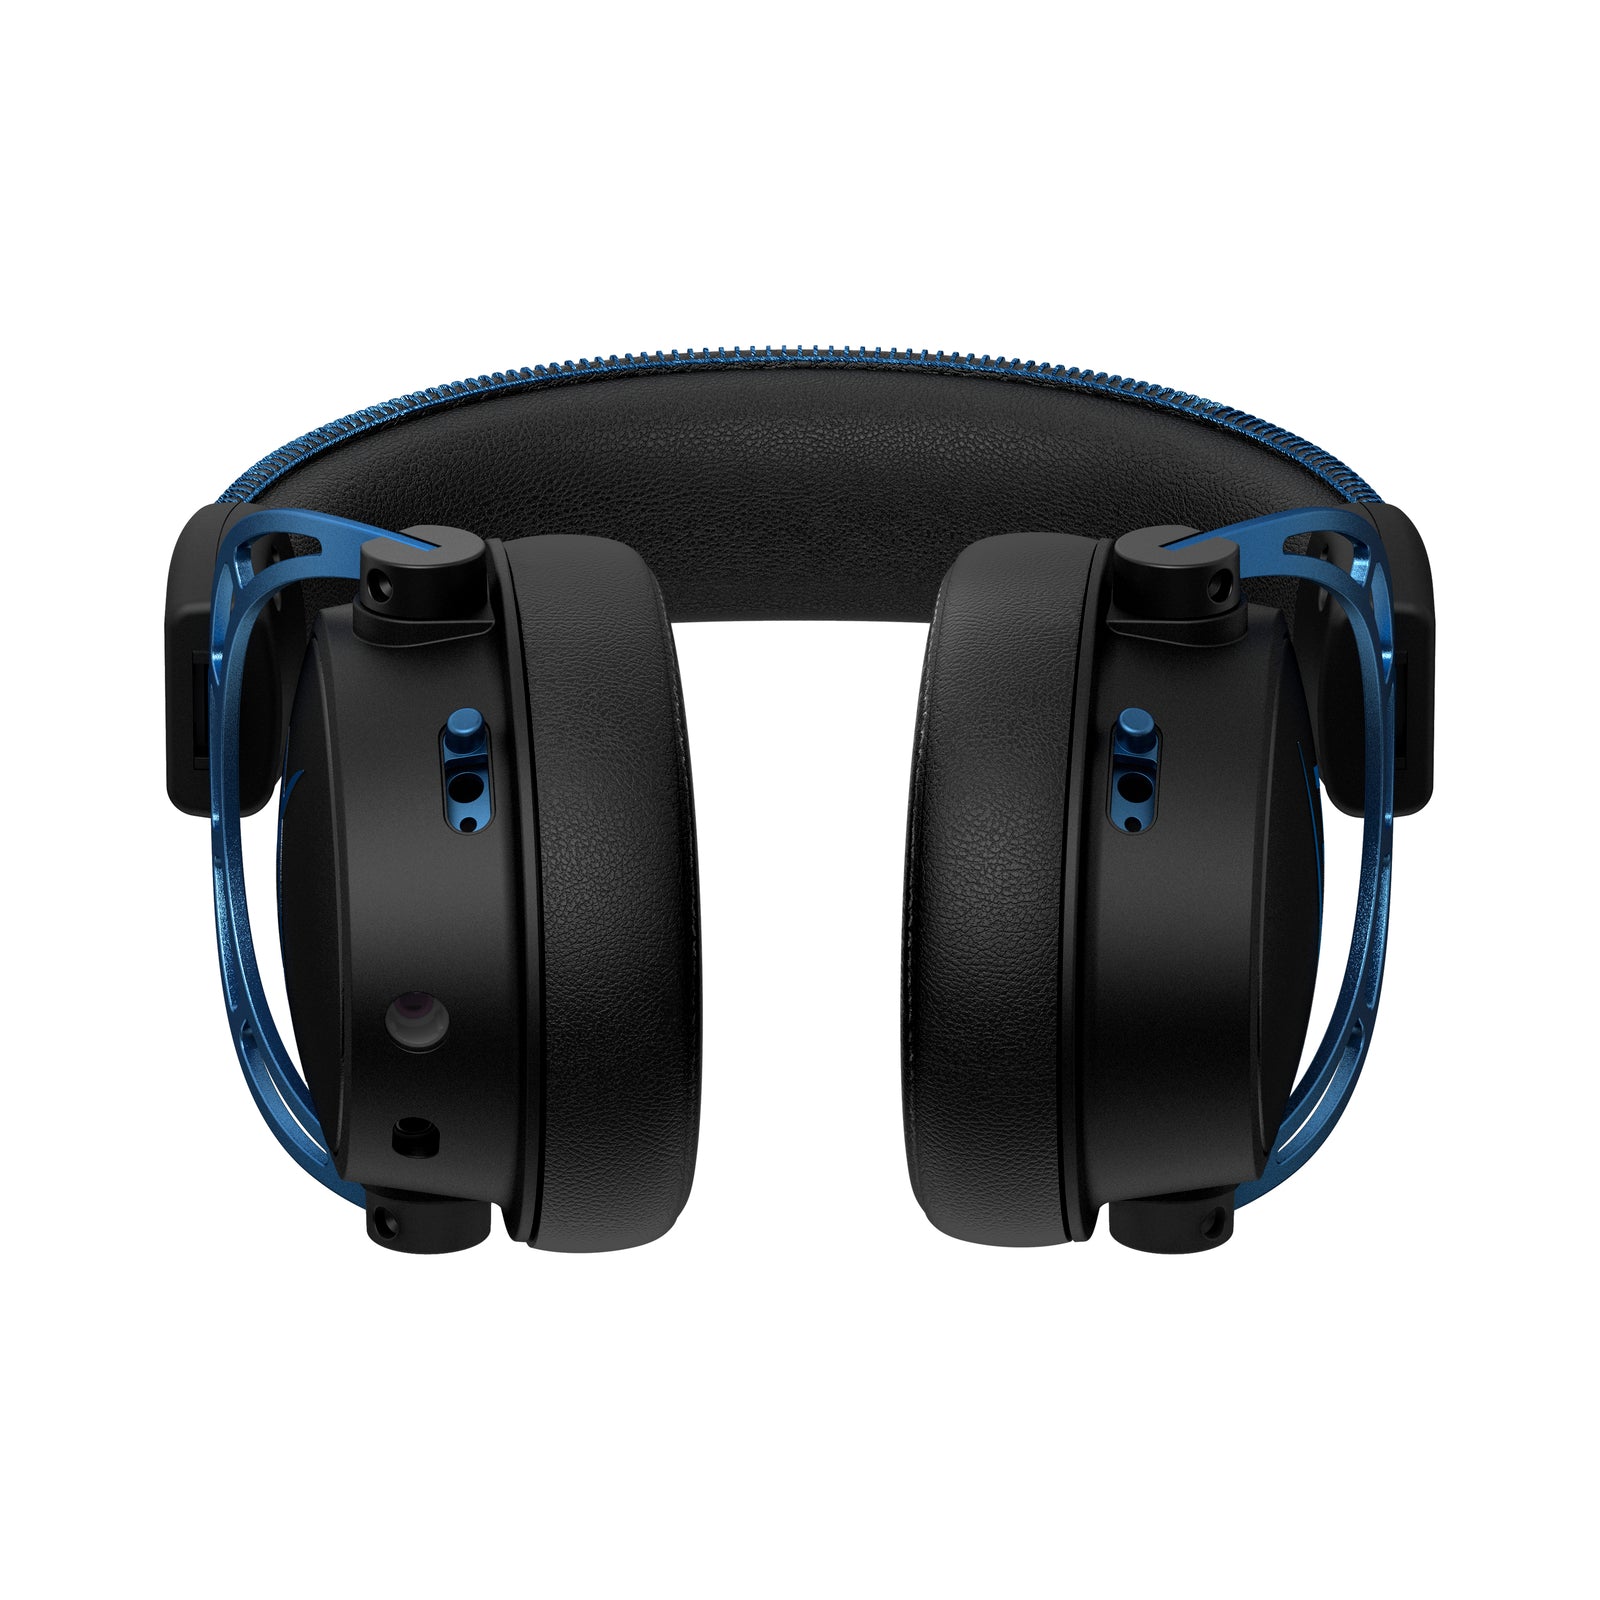 Cloud Alpha S – USB Gaming Headset with 7.1 Surround Sound ...